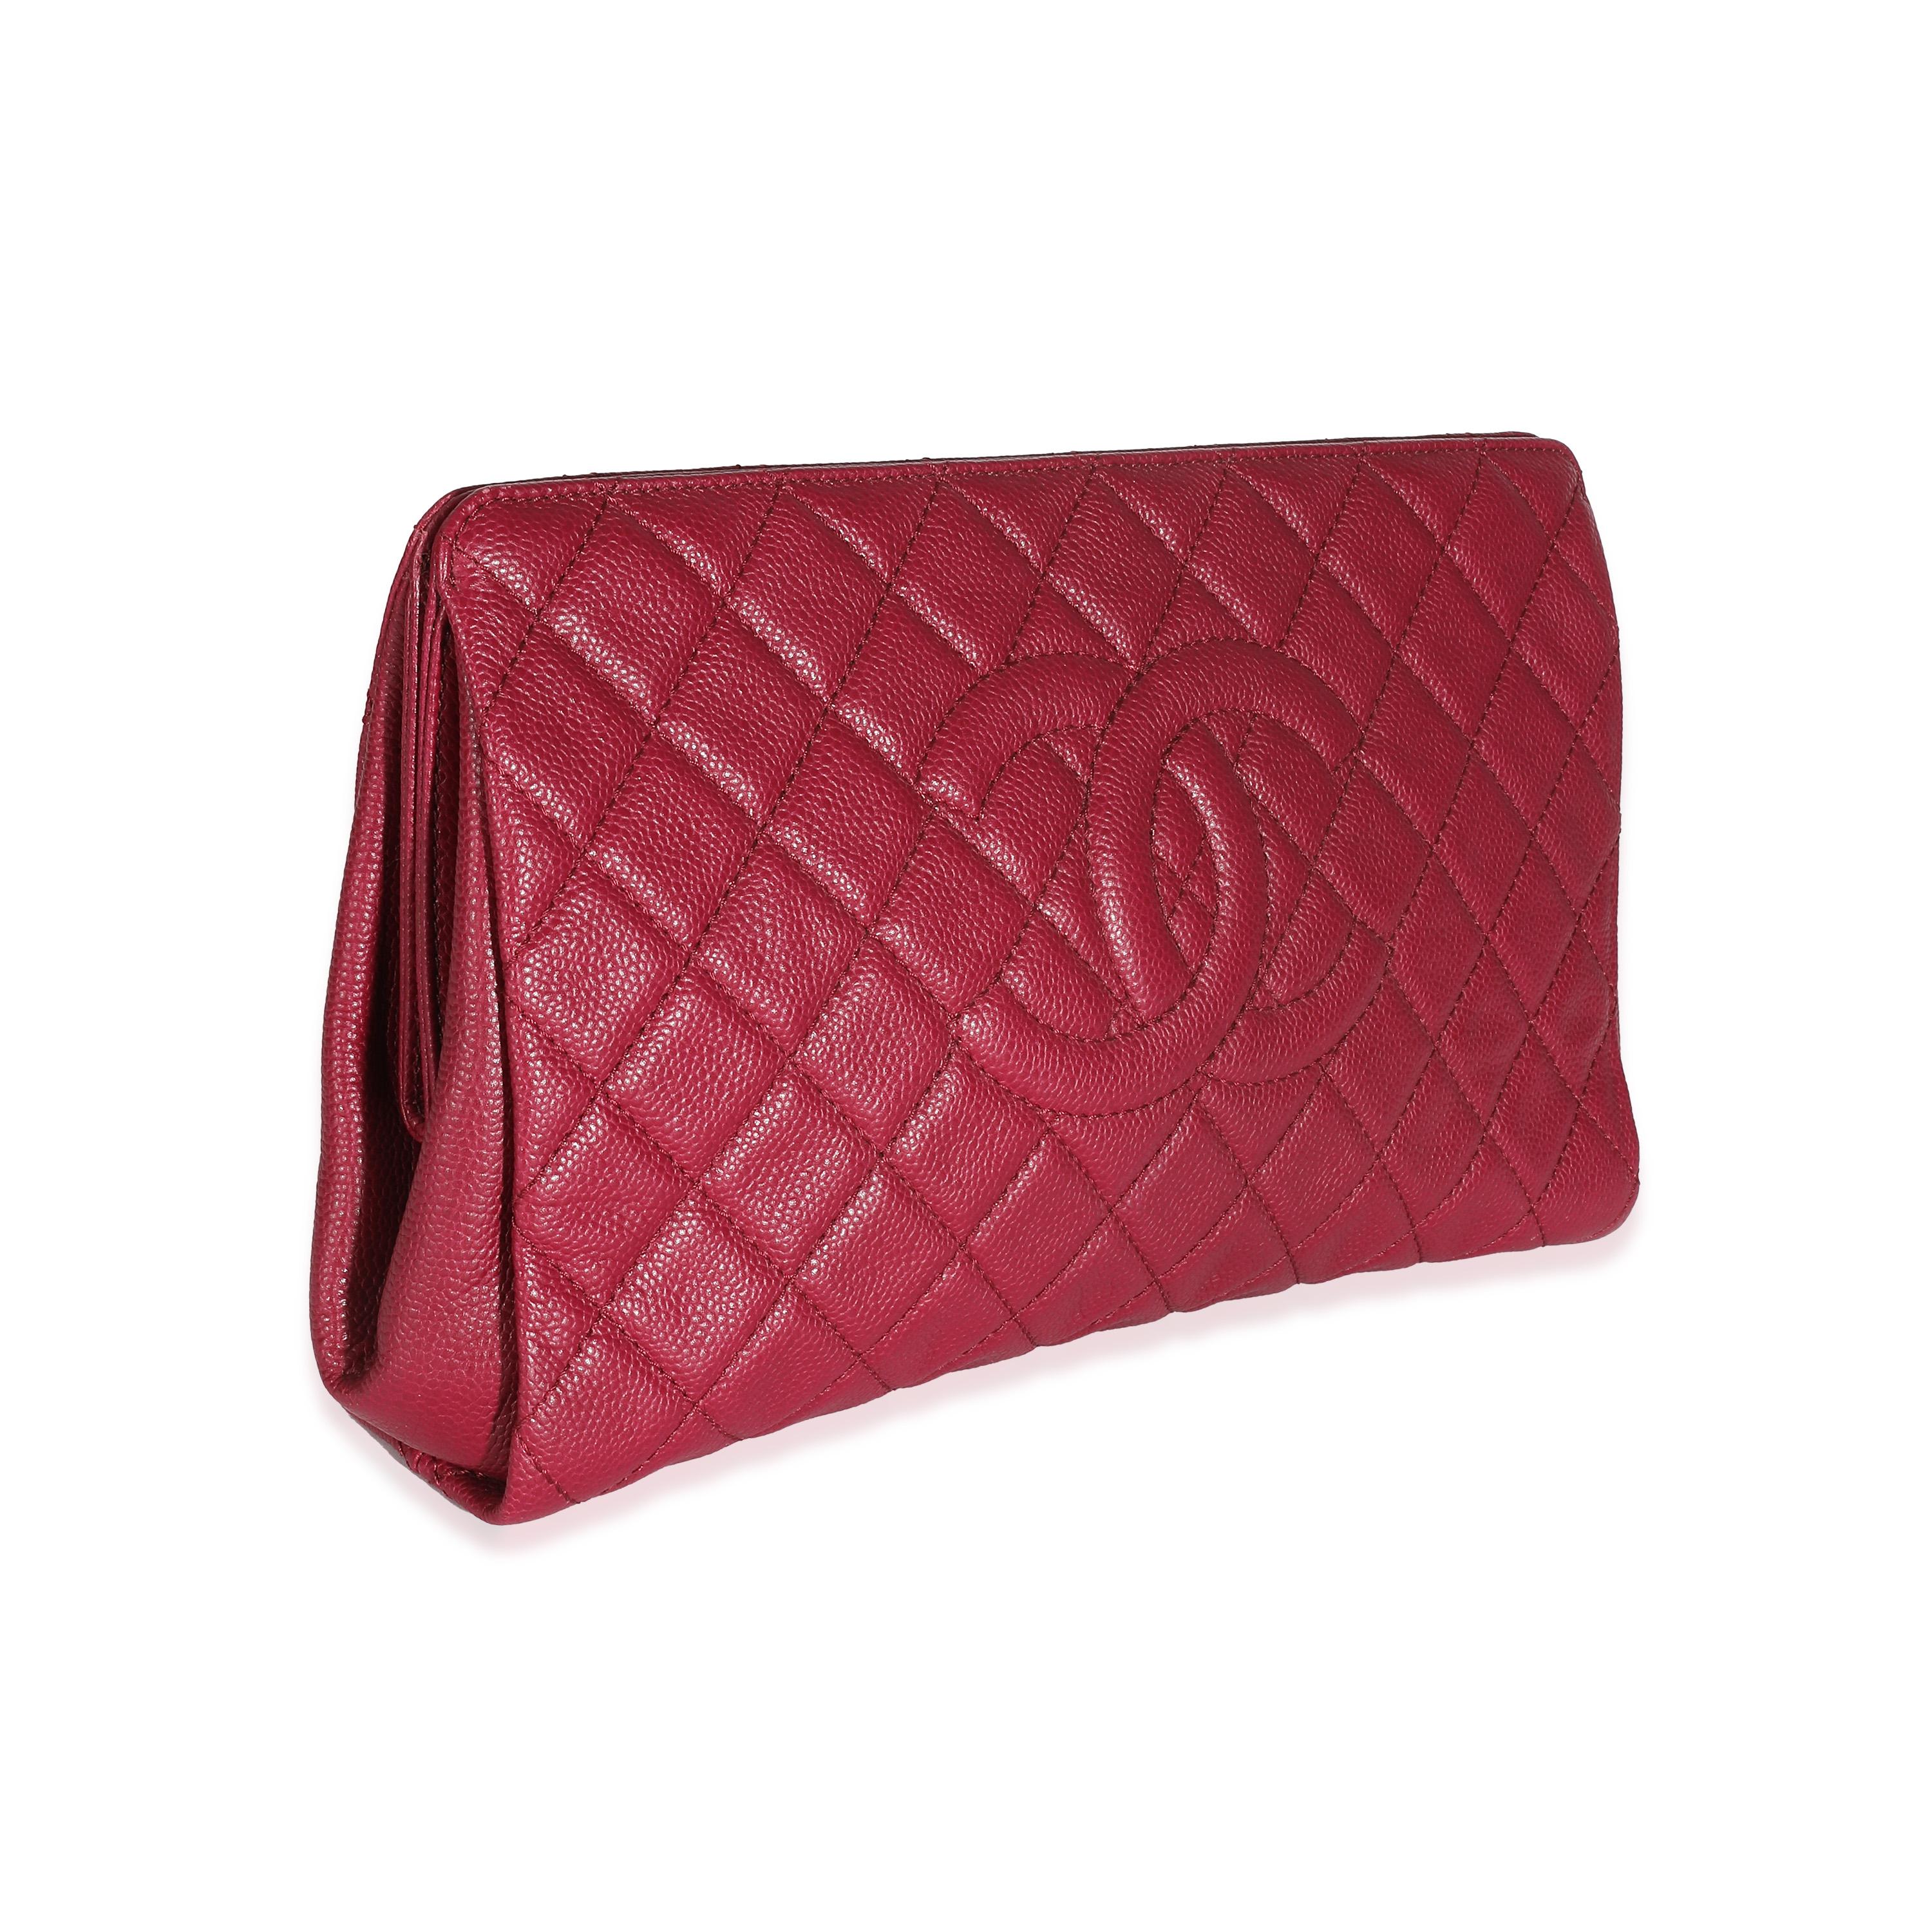 Listing Title: Chanel Dark Pink Quilted Caviar CC Timeless Frame Clutch
SKU: 136230
Condition: Pre-owned 
Handbag Condition: Excellent
Condition Comments: Item is in excellent condition and displays light signs of wear. Mild corner scuffing. Light